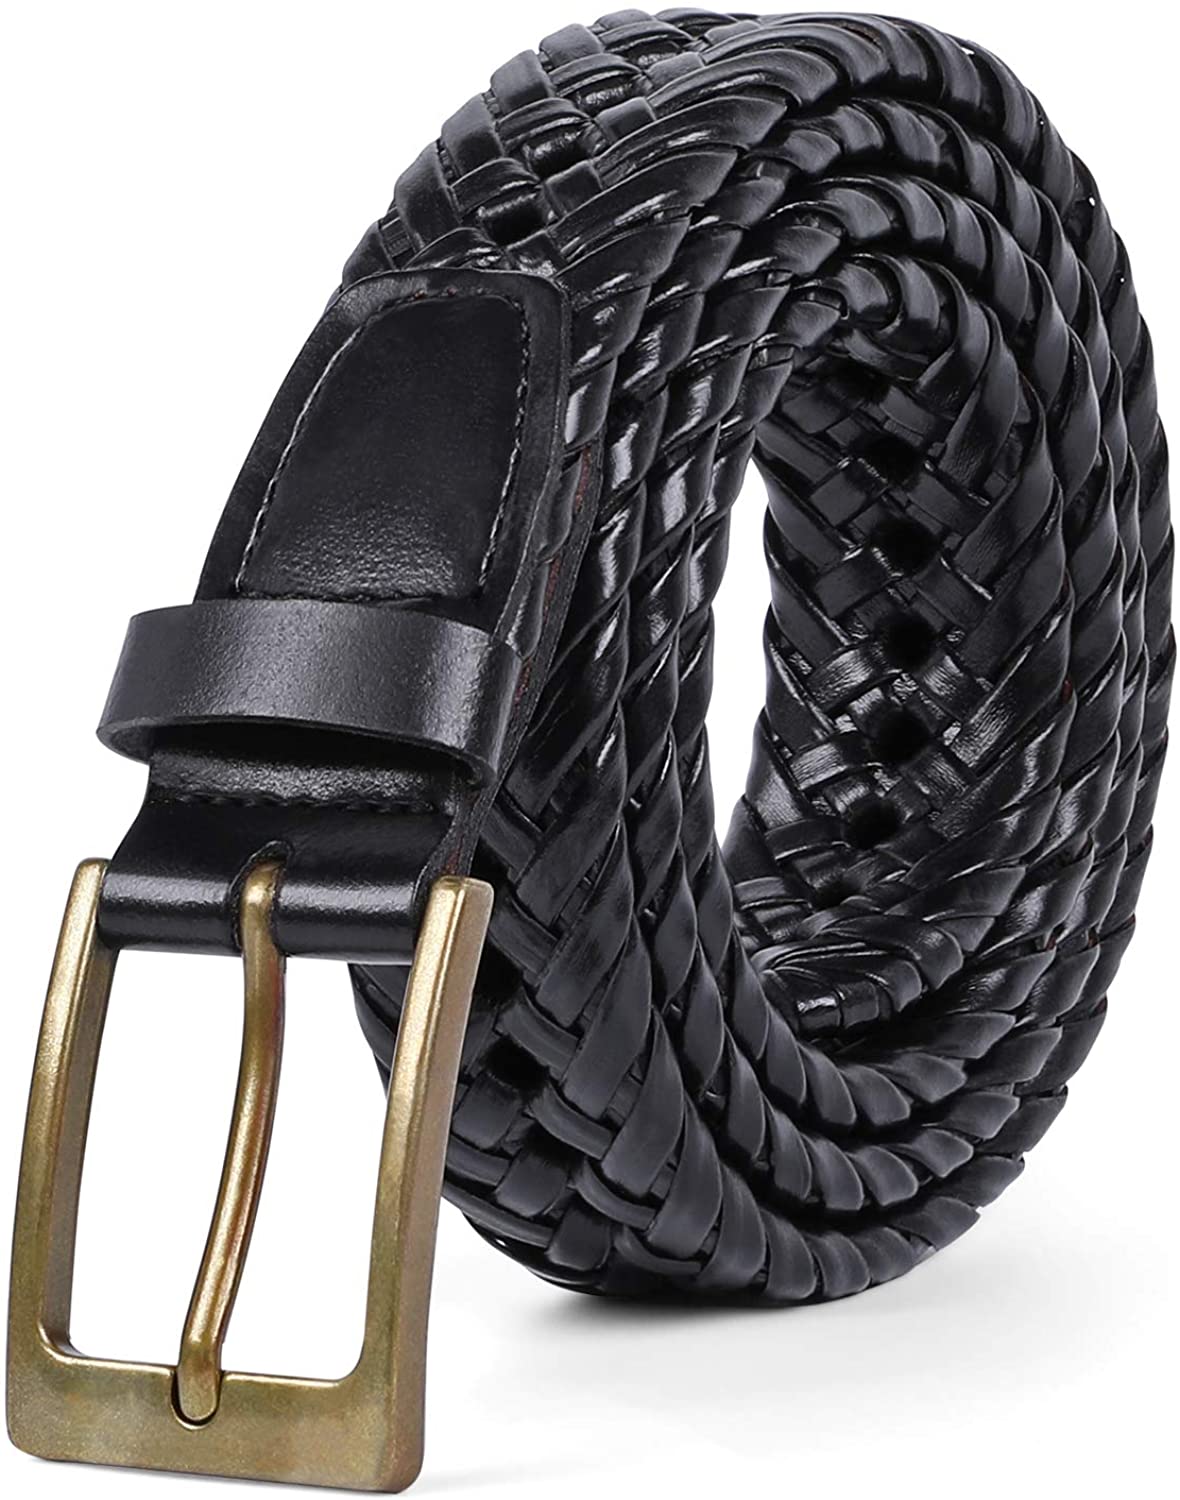 SUOSDEY Mens Braided Leather Belt Cowhide Woven Leather Belt for